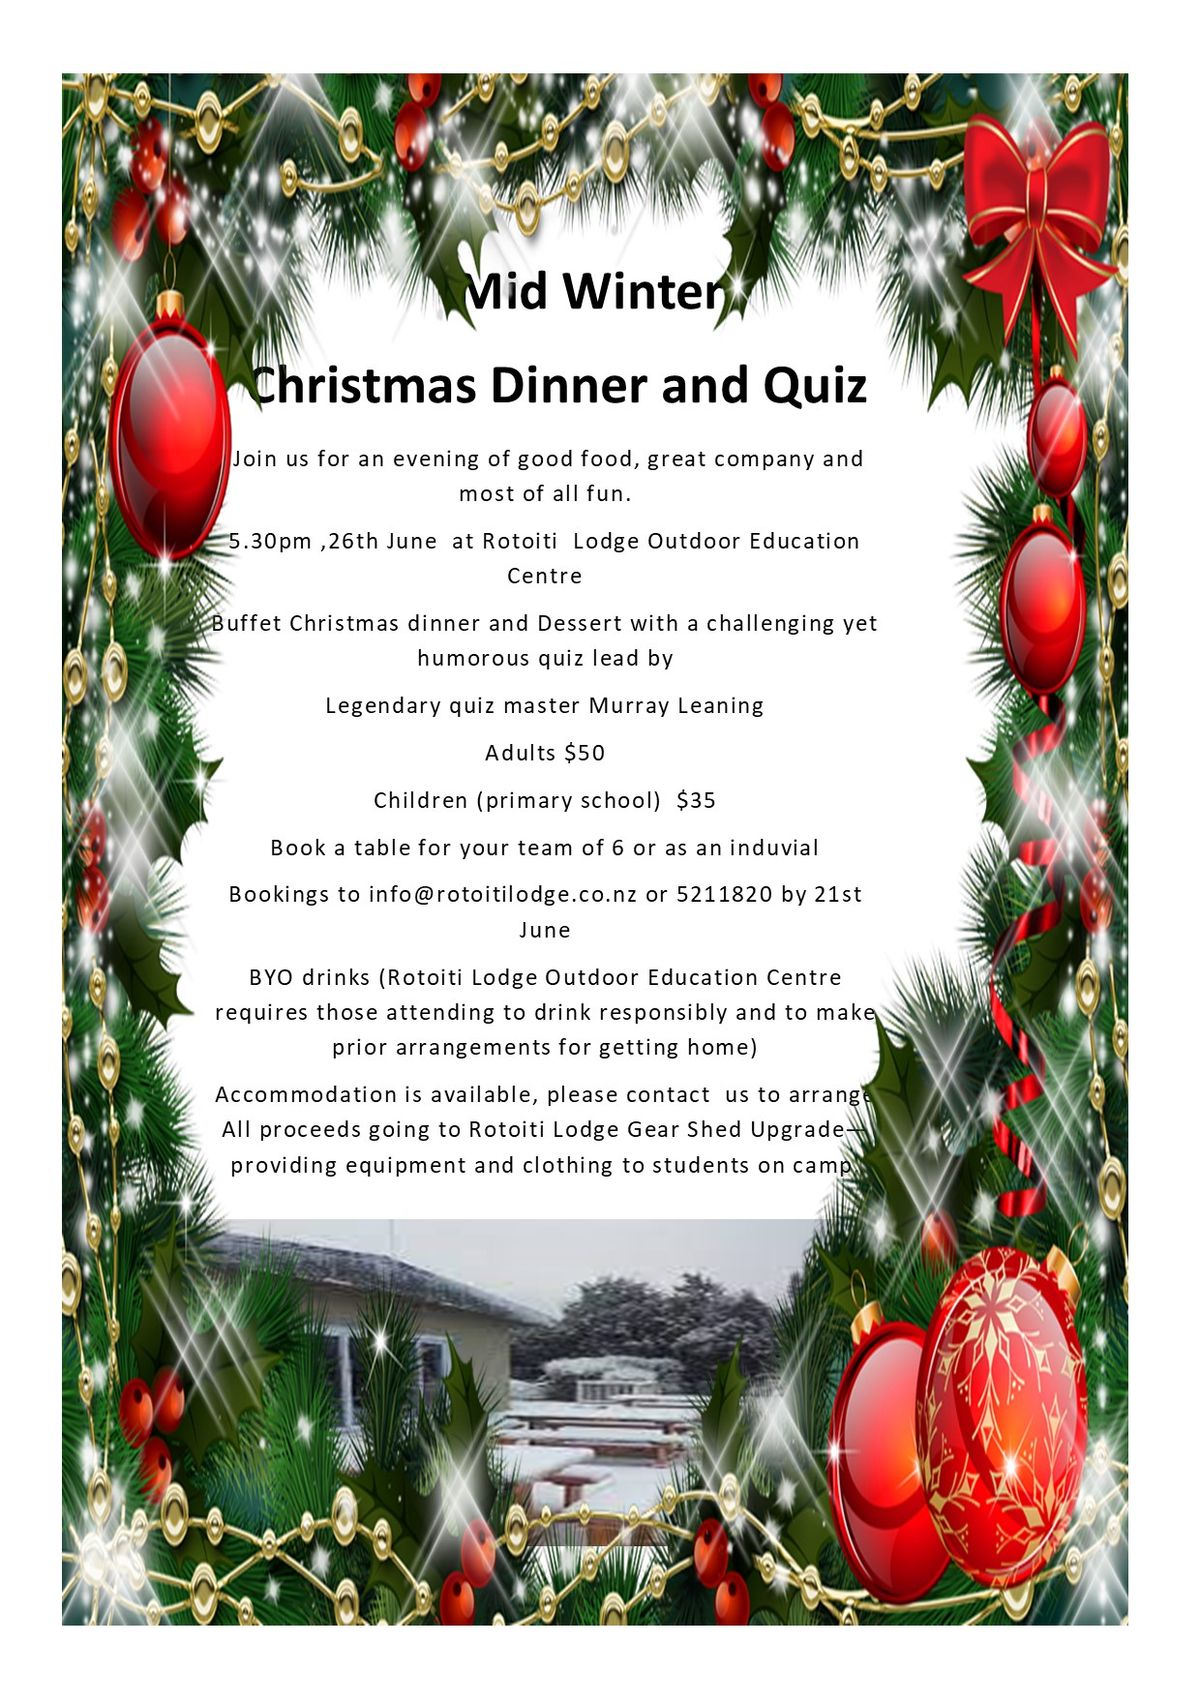 Mid-Winter Christmas Dinner and Quiz